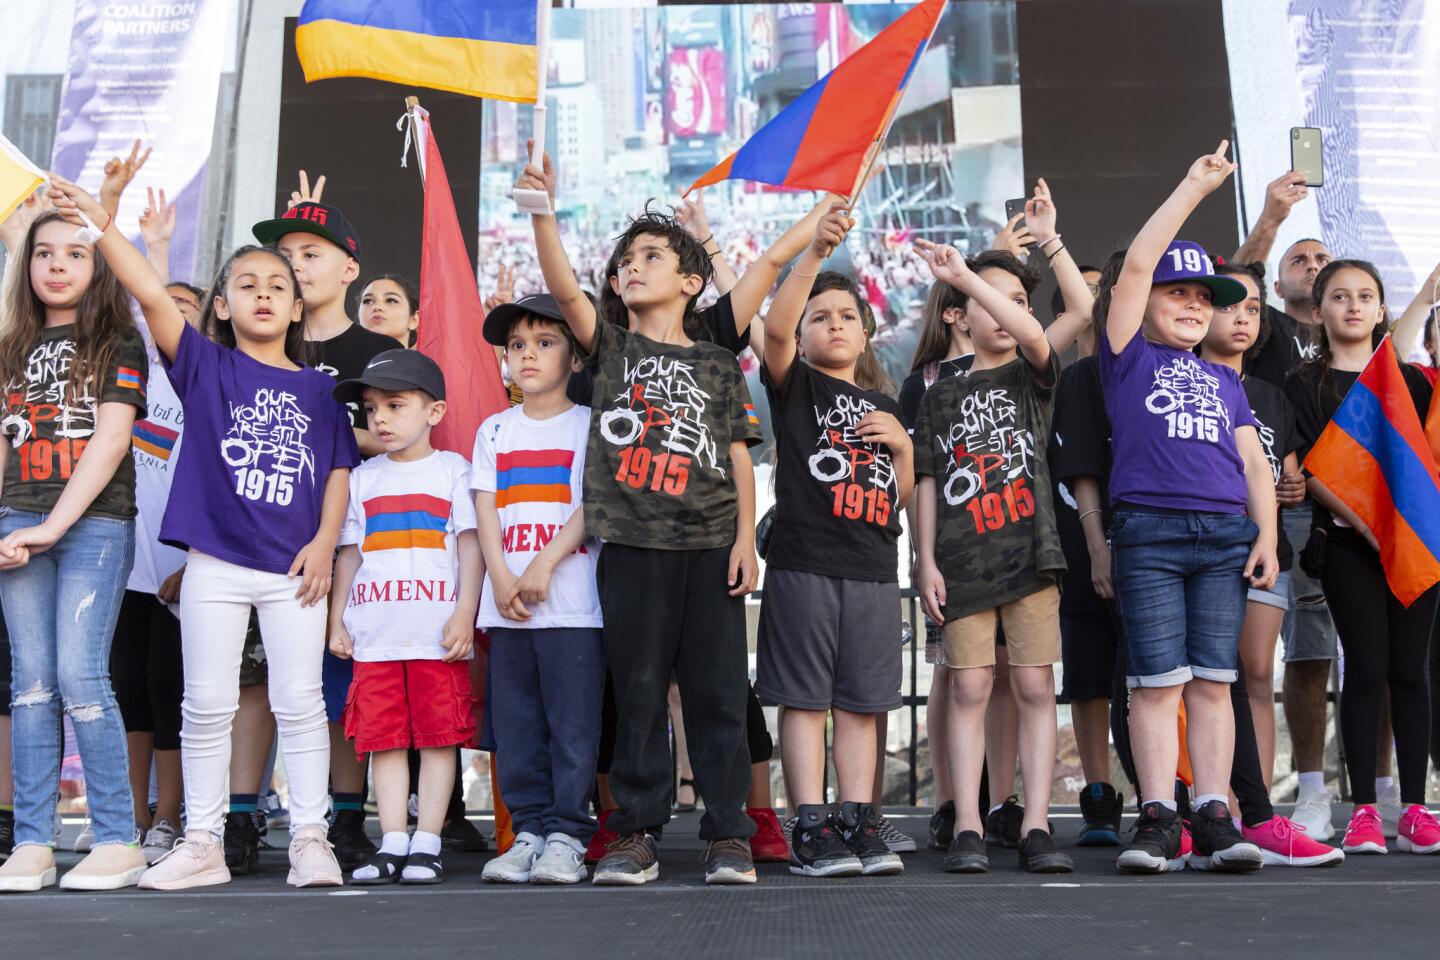 Children participate in a rally outside the Turkish Consulate in Los Angeles to remember the Armenian genocide of more than a century ago.